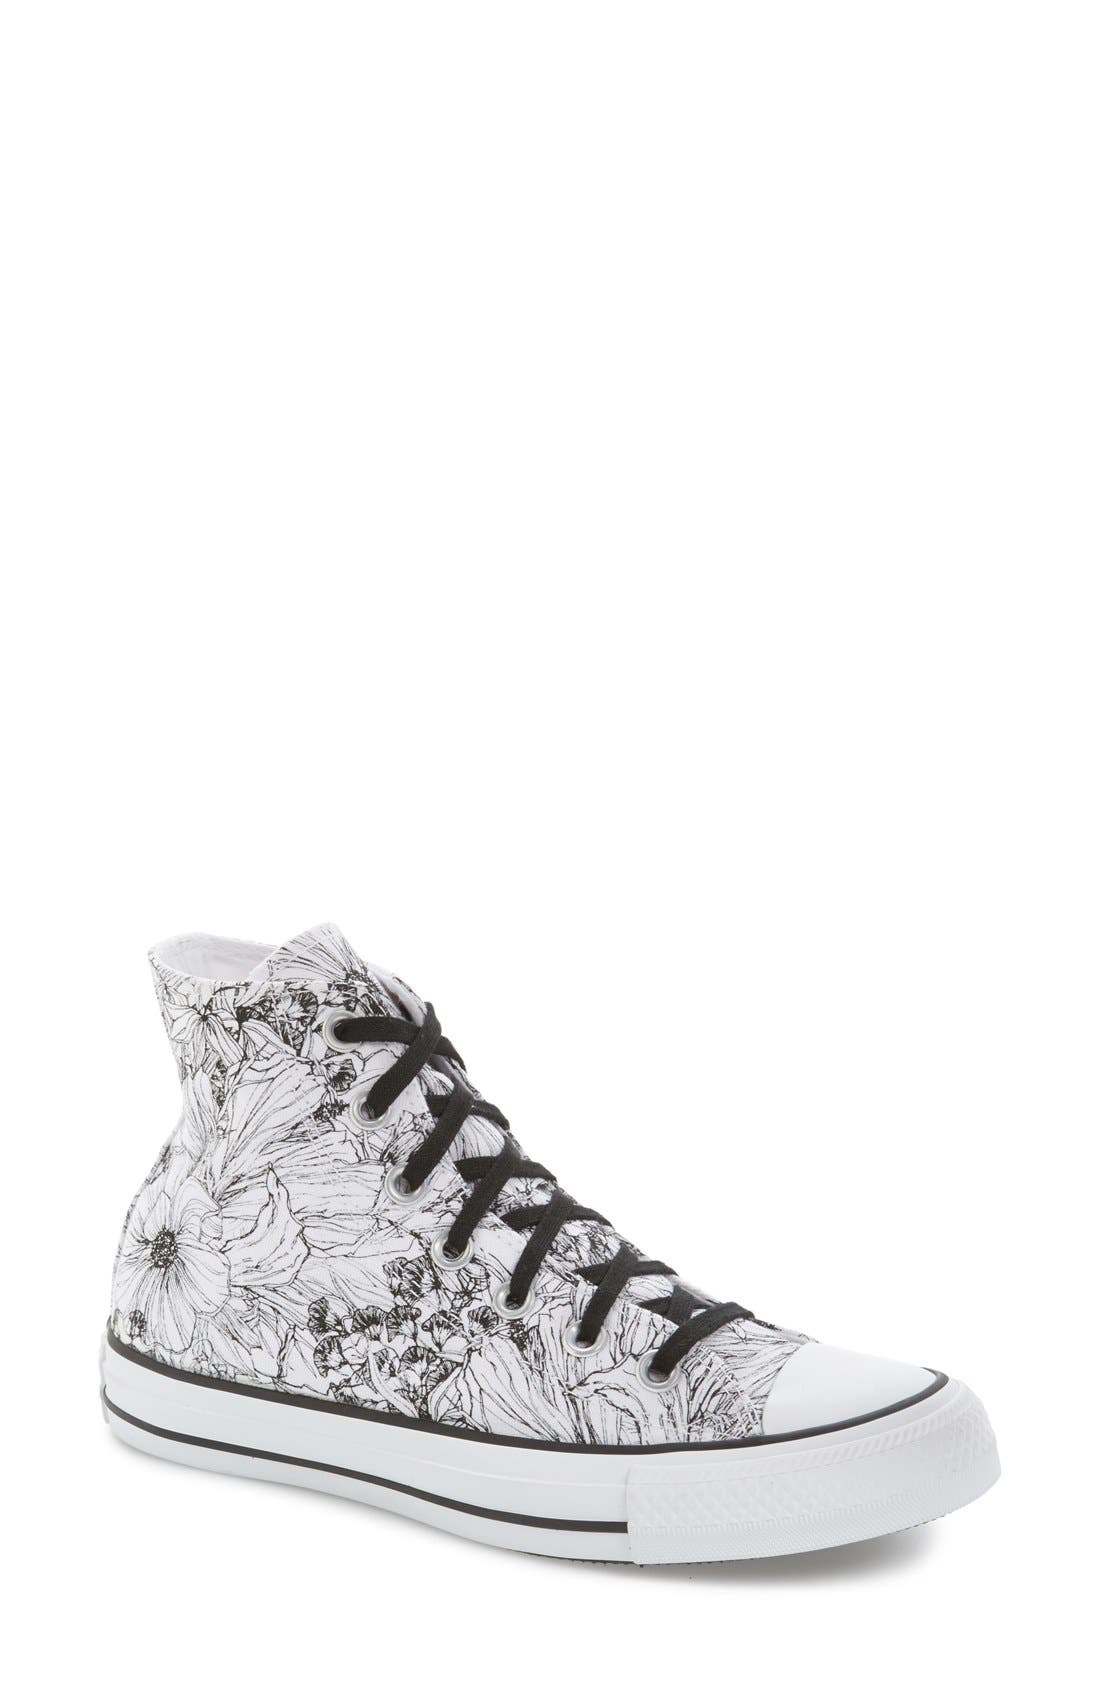 Converse Chuck Taylor® All Star® Floral 